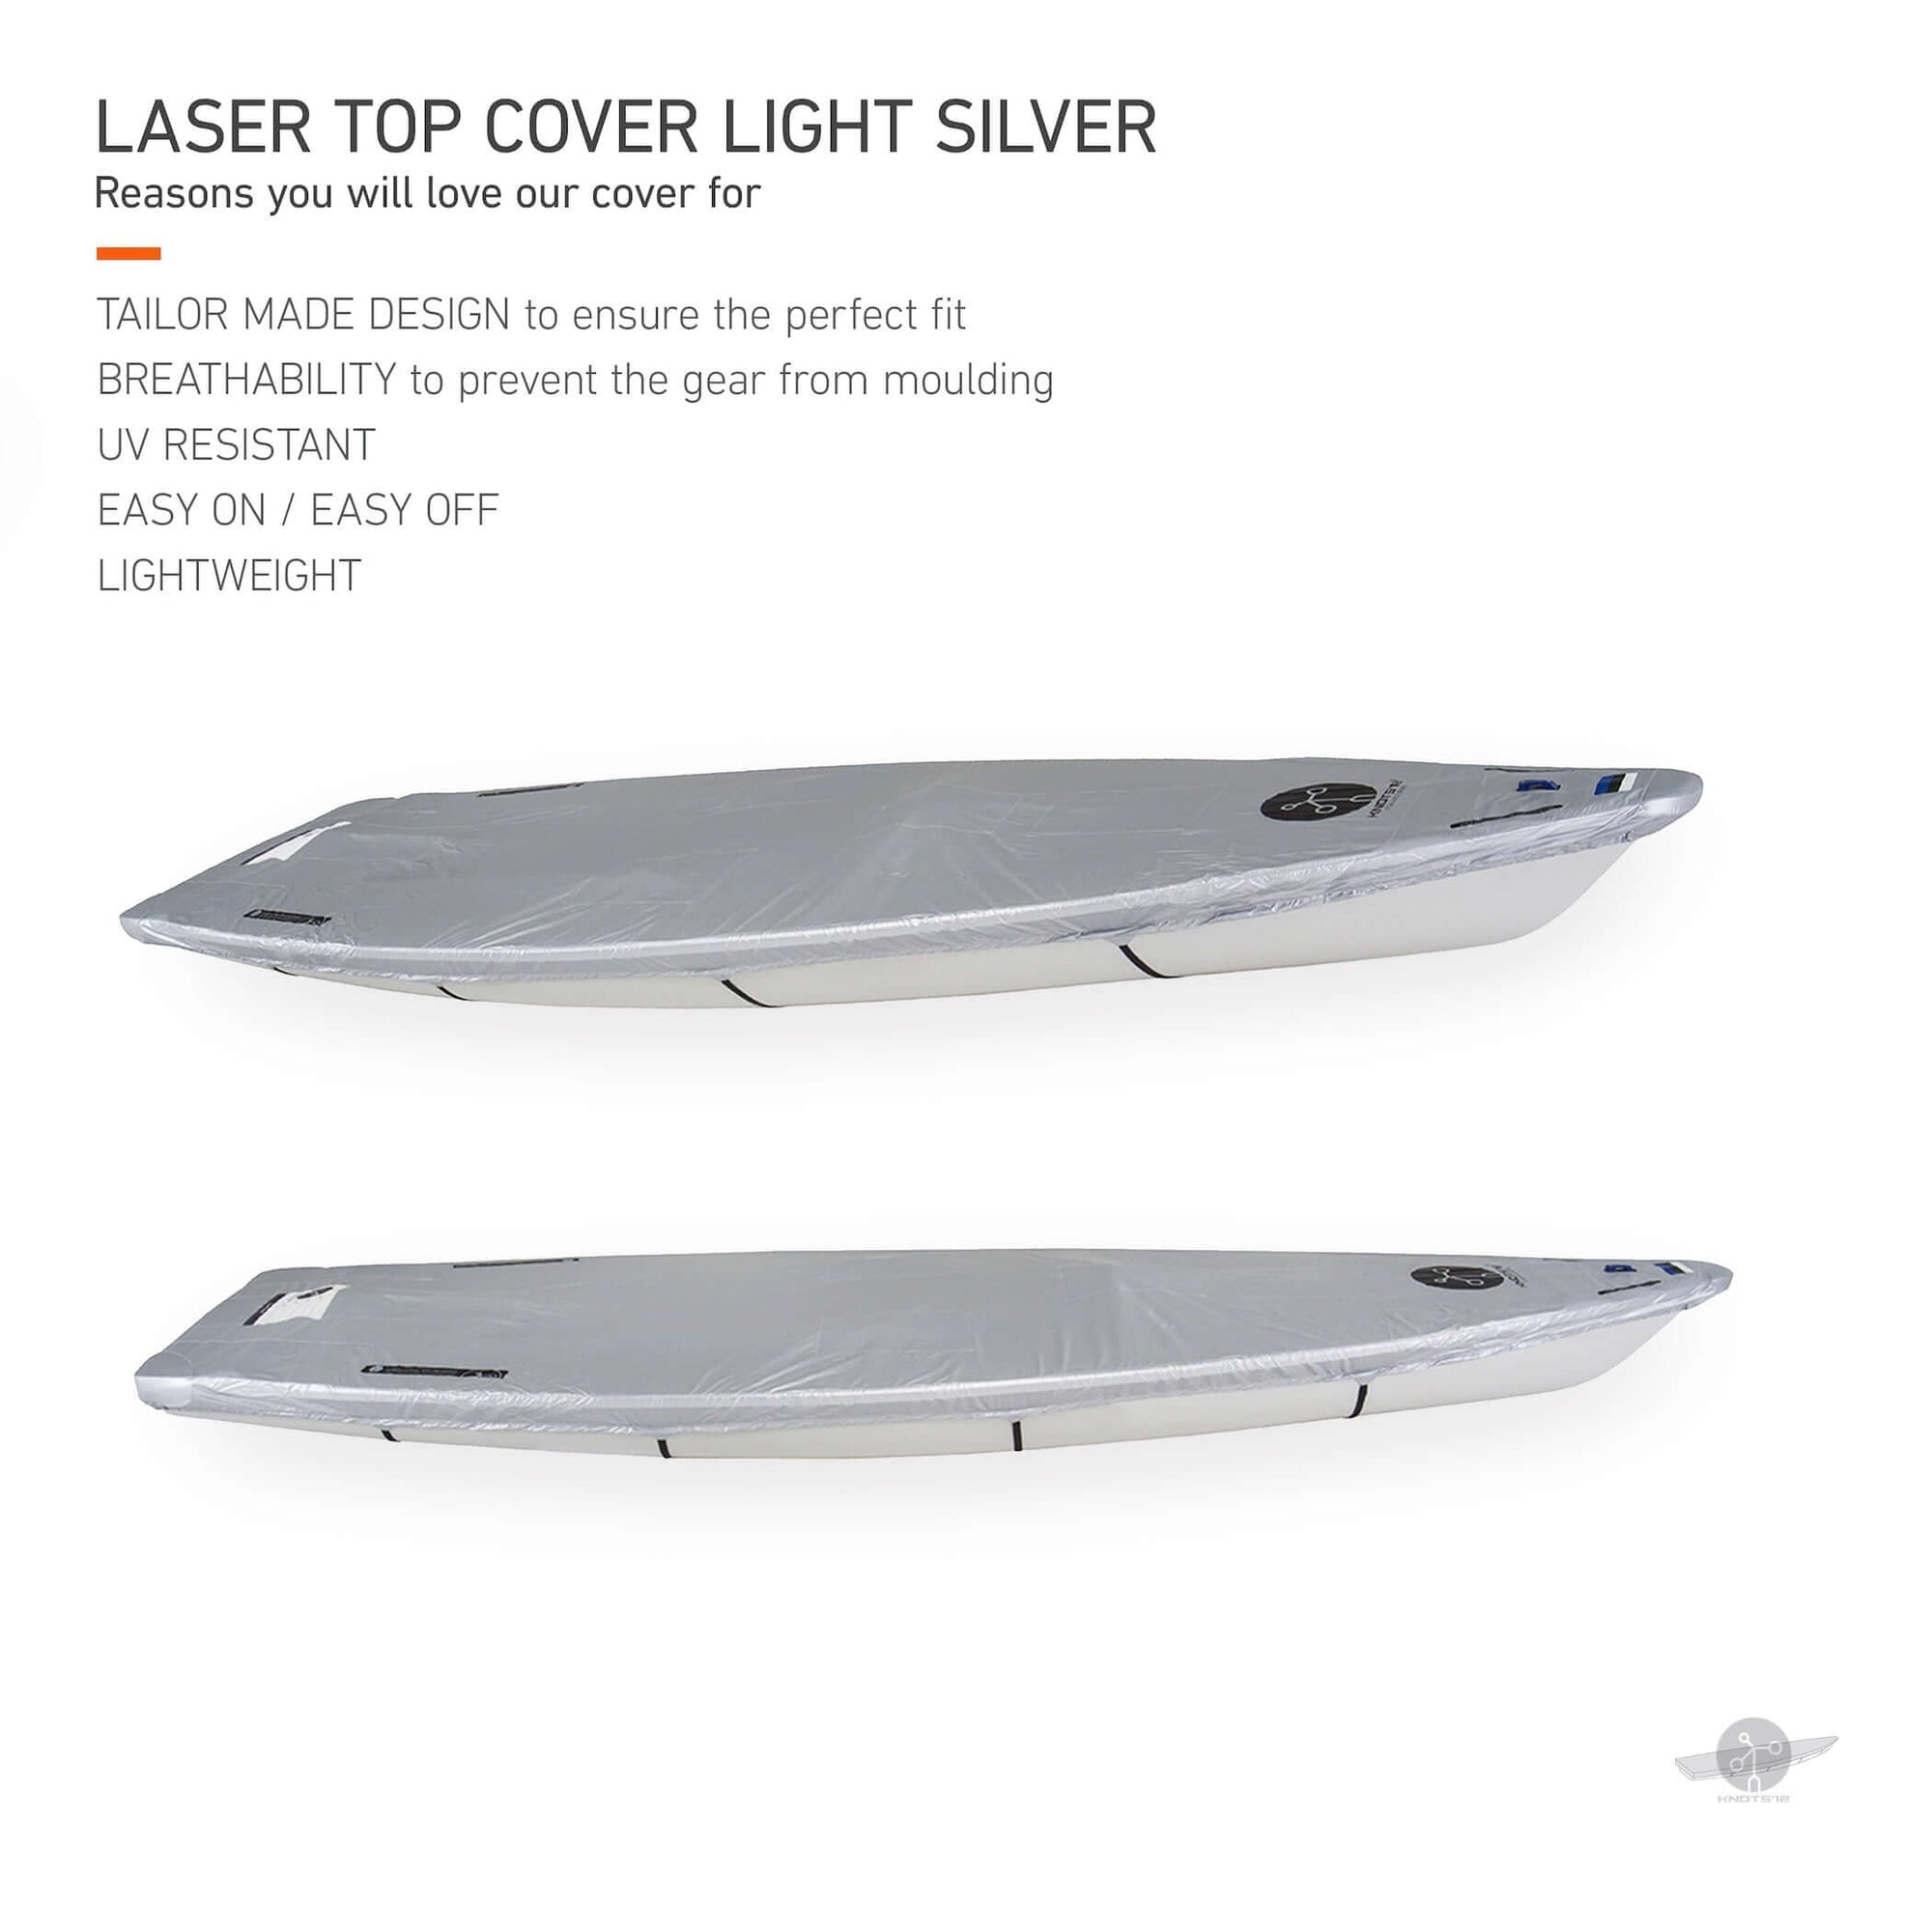 Knots12 Laser boat top cover light silver. Reasons you will love our cover for. Tailor made design to ensure the perfect fit. Breathability to prevent the gear from moulding. UV resistant. Easy on, easy off. Lightweight. 